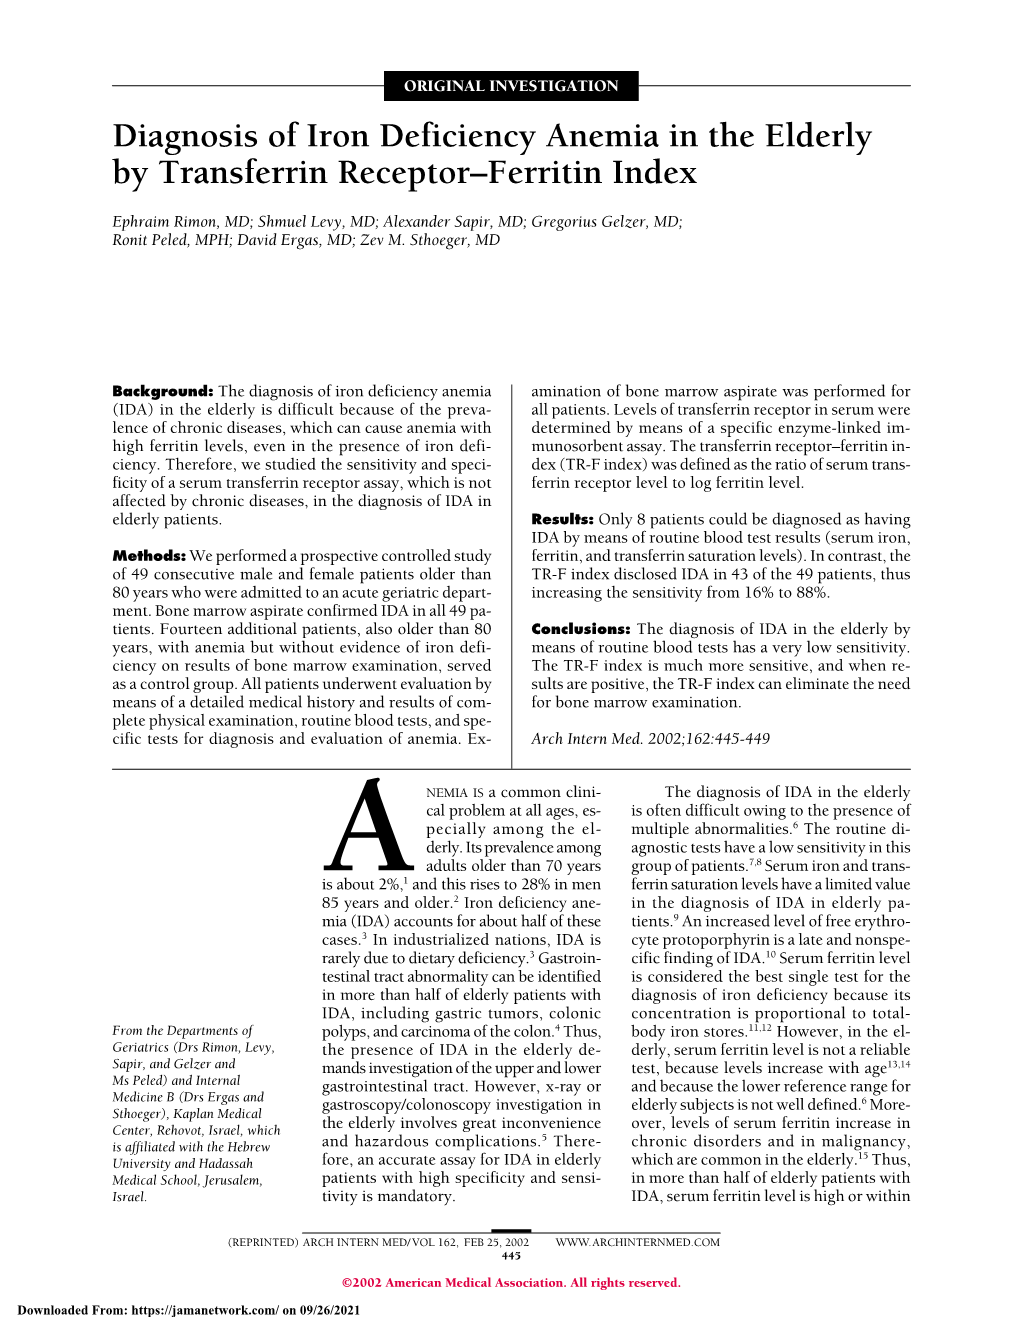 Diagnosis of Iron Deficiency Anemia in the Elderly by Transferrin Receptor–Ferritin Index